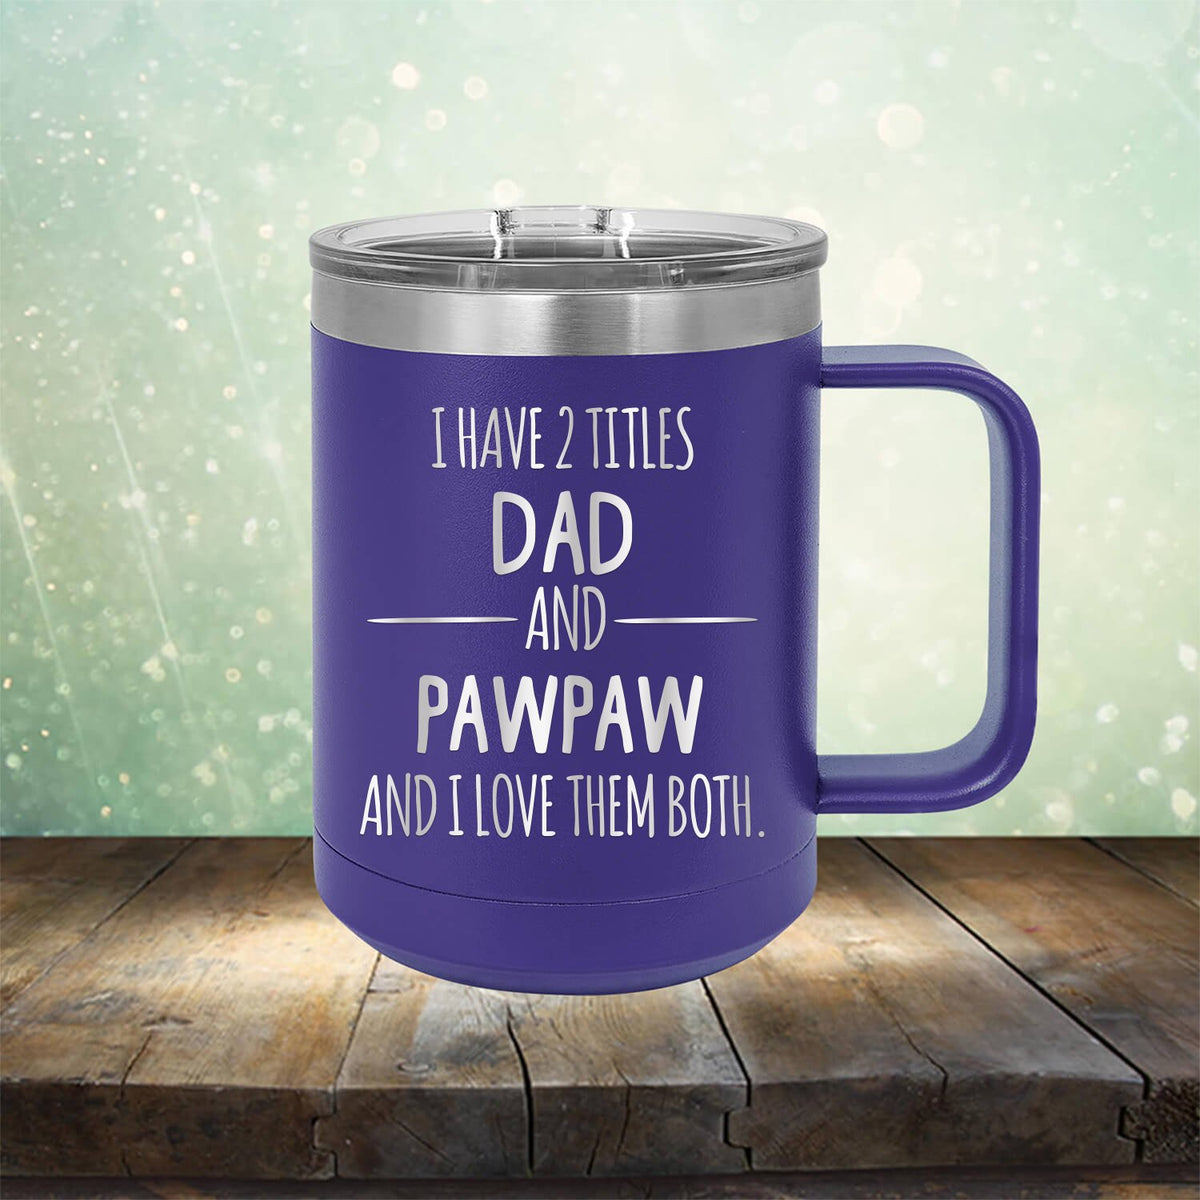 I Have 2 Titles Dad and Pawpaw and I Love Them Both